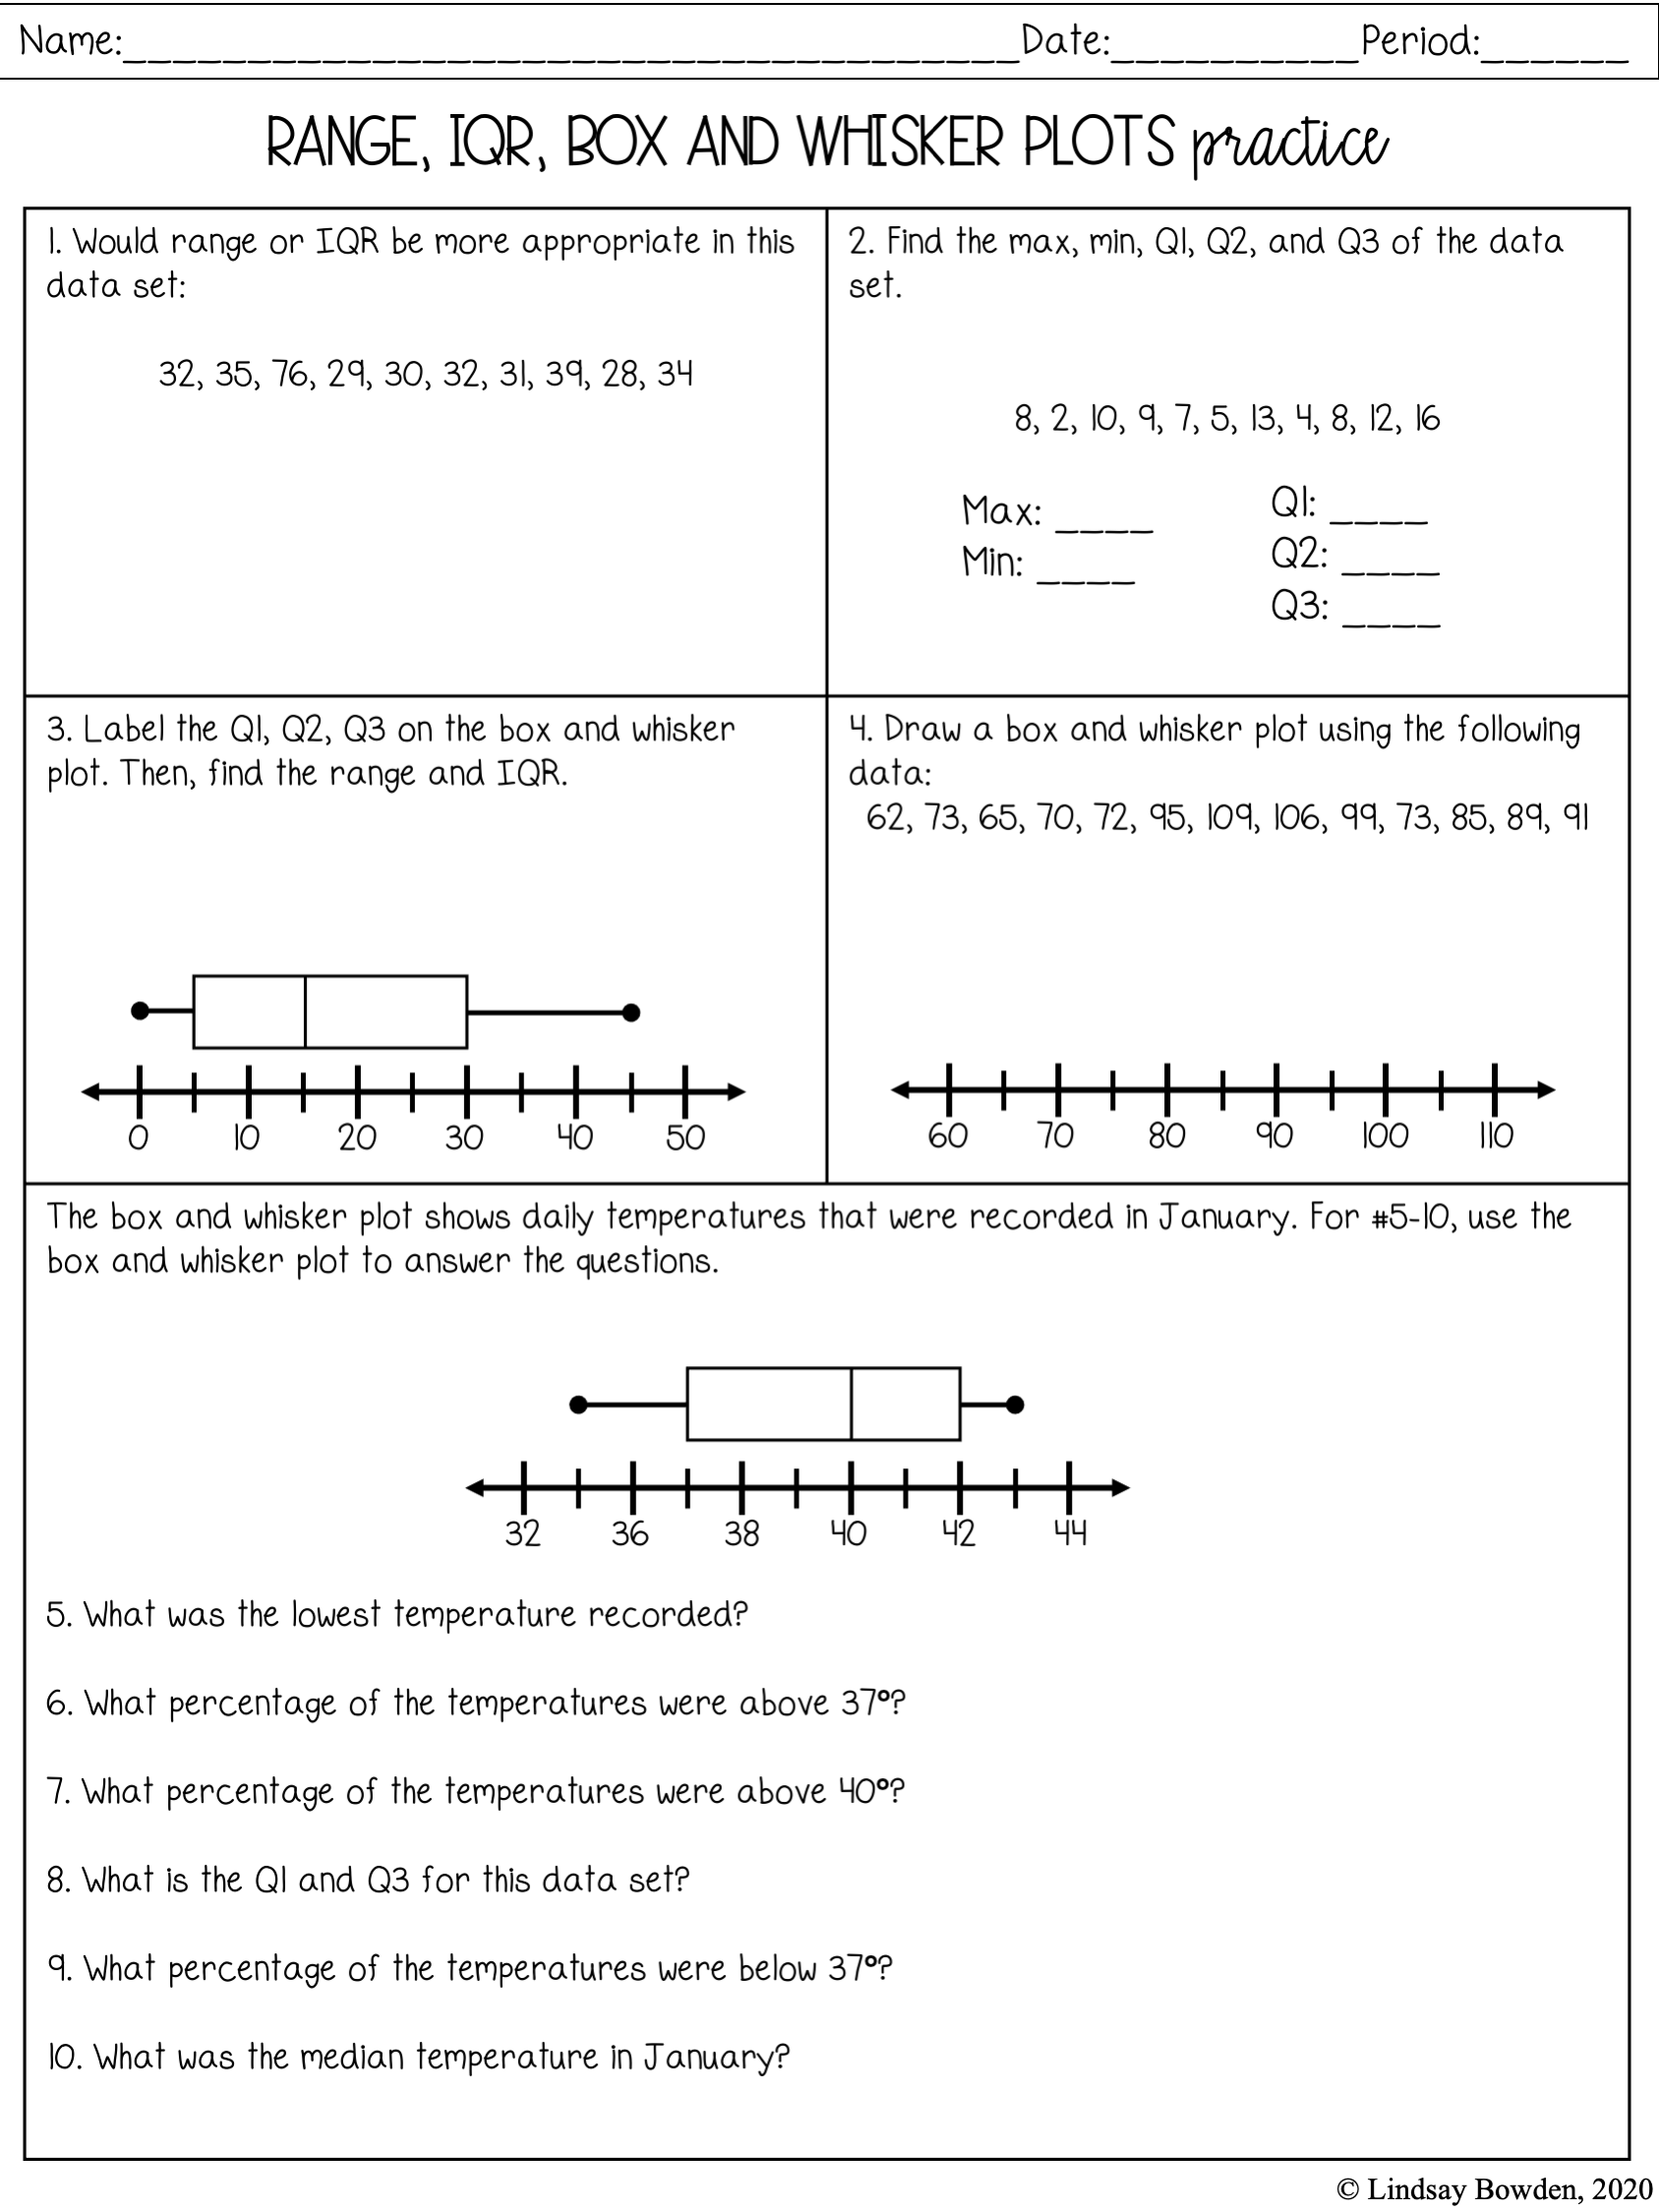 Box and Whisker Plots Notes and Worksheets - Lindsay Bowden Throughout Box And Whisker Plot Worksheet